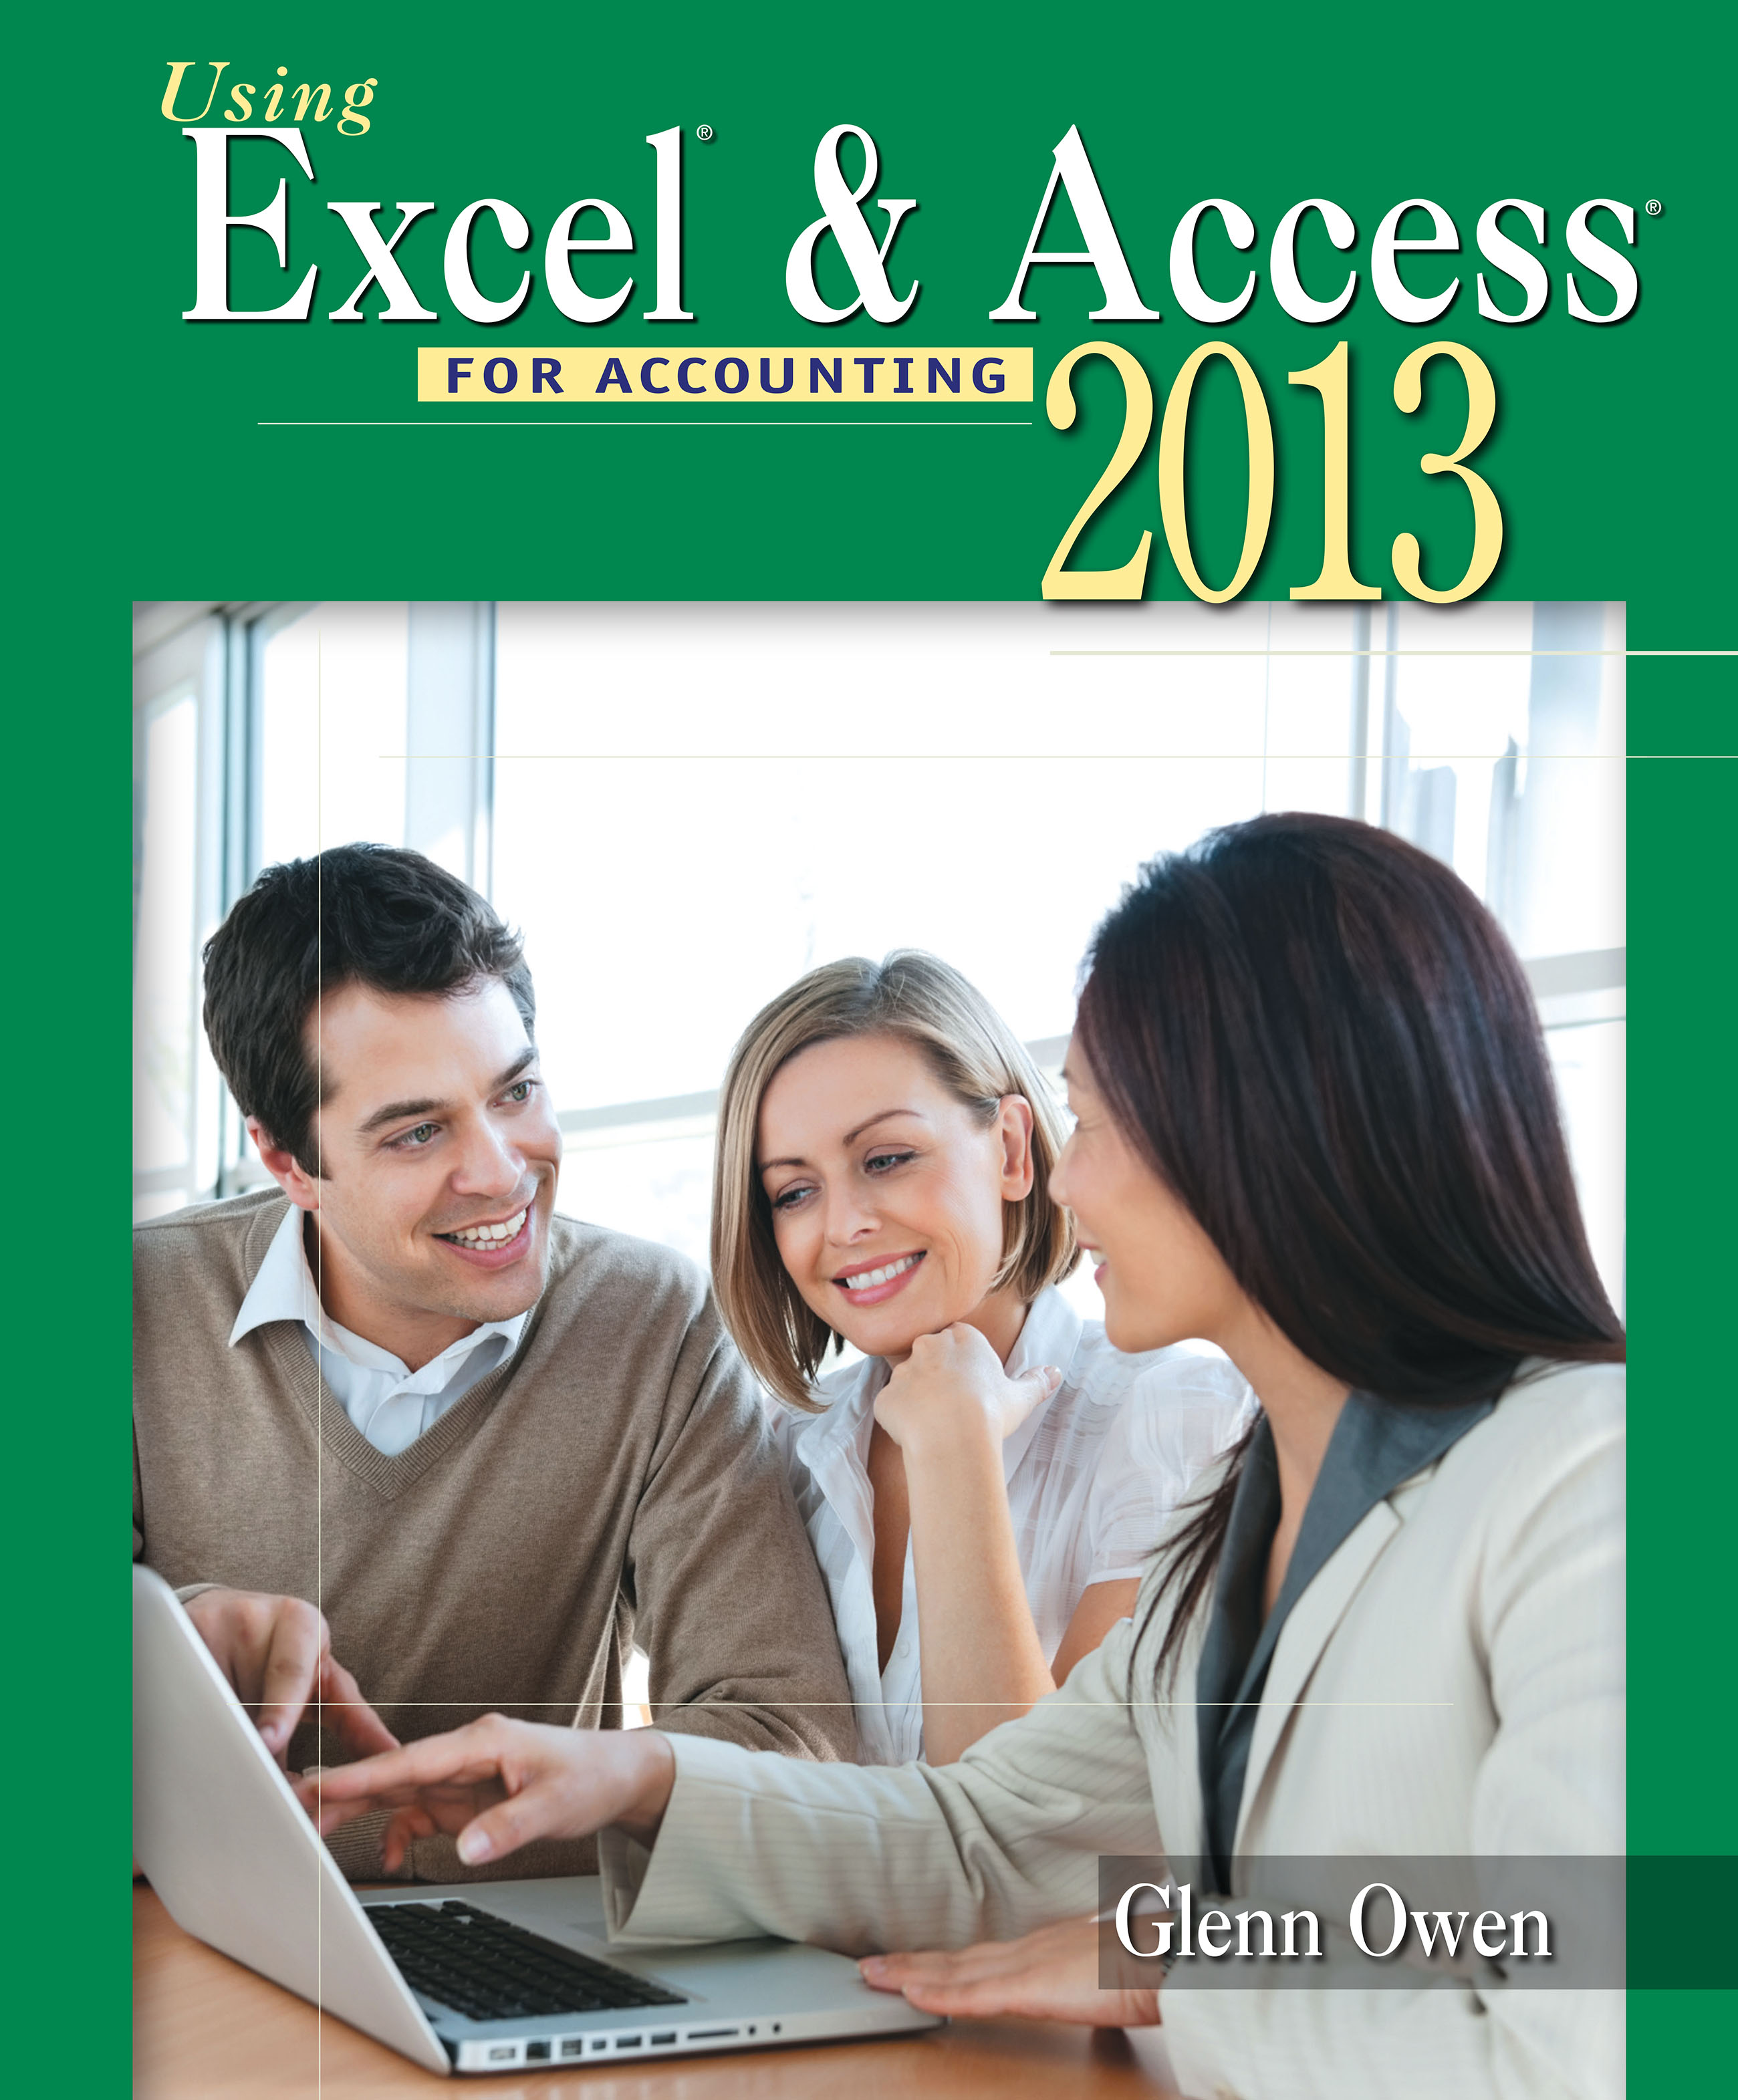 Using Microsoft Excel and Access 2013 for Accounting